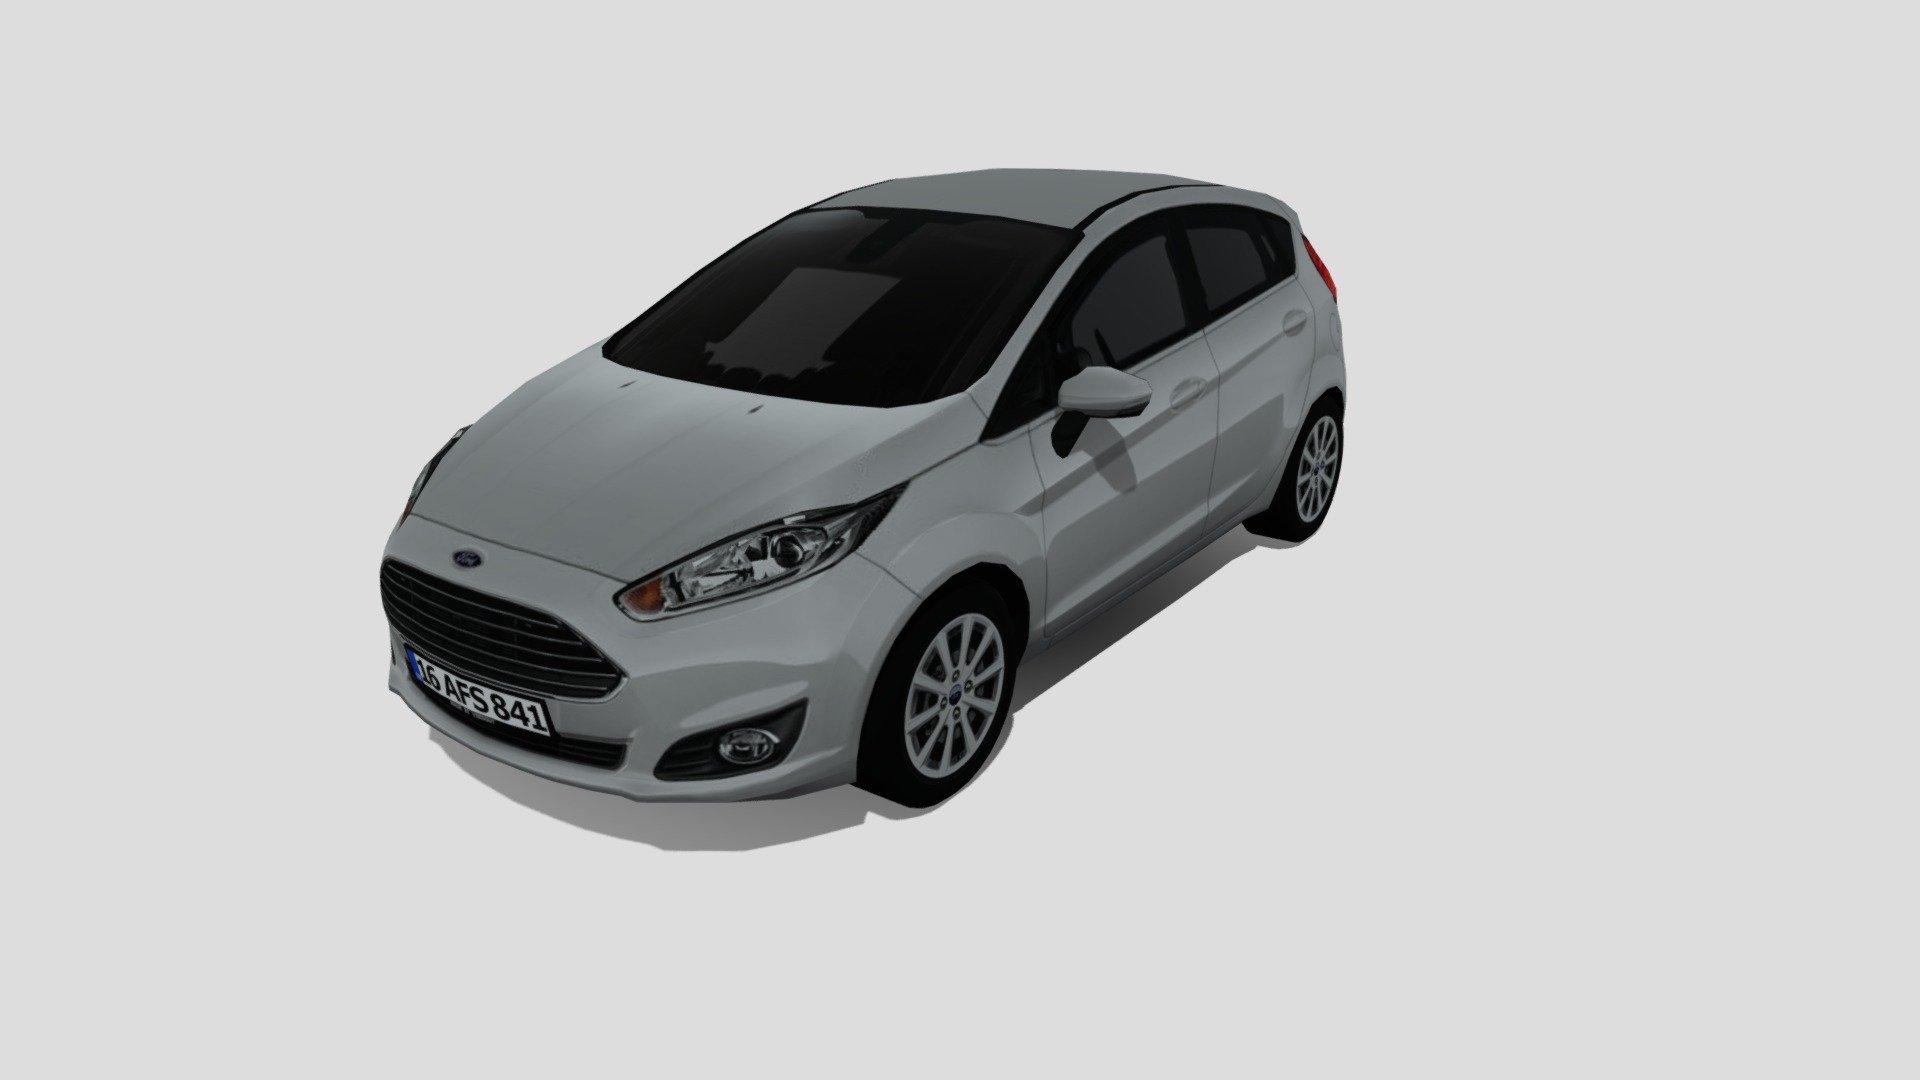 2015 Ford Fiesta by VeesGuy

Tris: 3602
Texture: 1024x1024 - 2015 Ford Fiesta - 3D model by VeesGuy 3d model